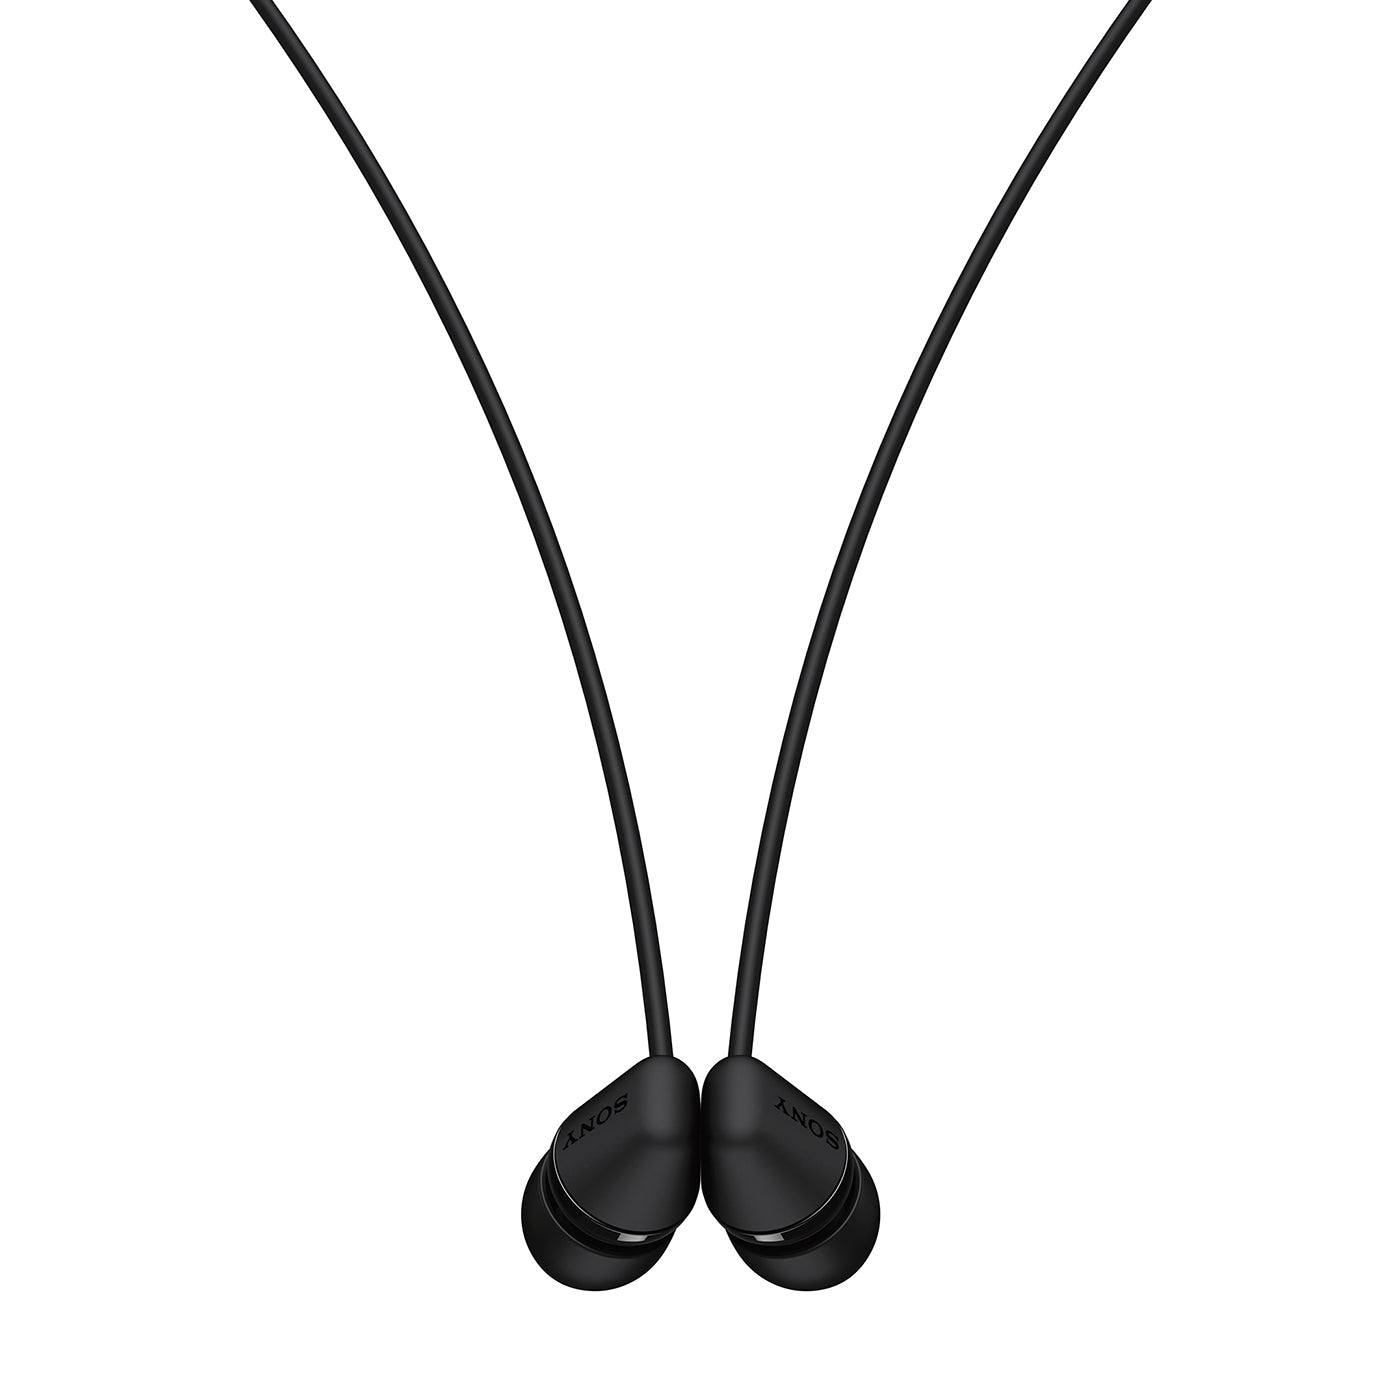 Sony WI-C200 Wireless Bluetooth in-Ear Headphones with Mic, 15 Hrs Battery Life, Quick Charge